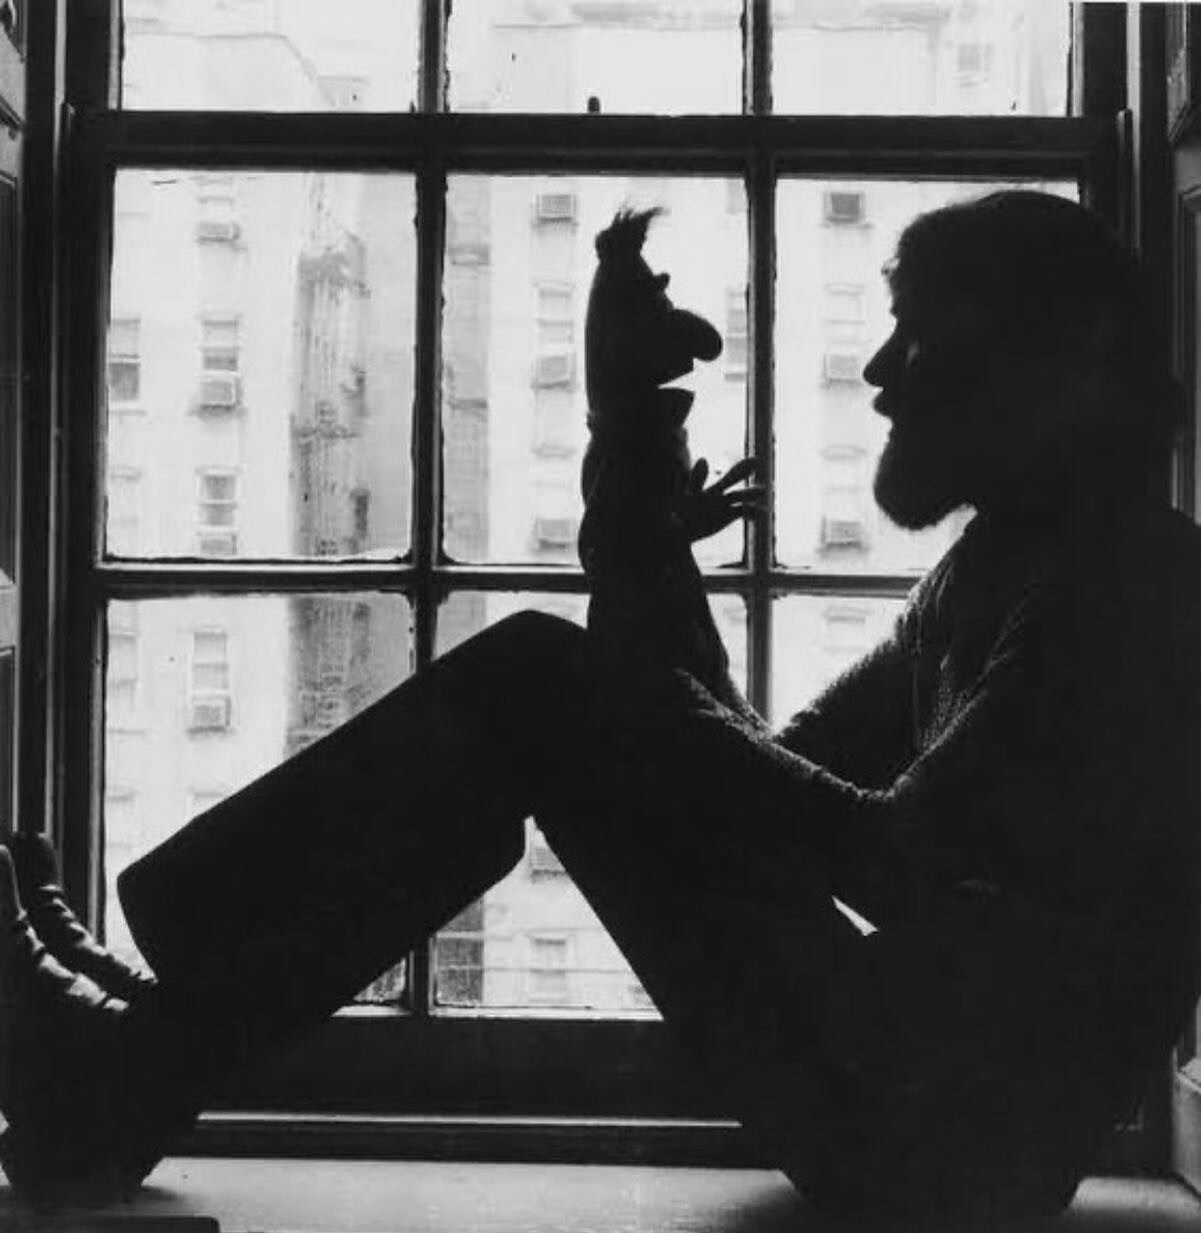 Yes, Bert, it is finally Friday.

Double check but: Jim Henson 1971 by Ted Neuhoff